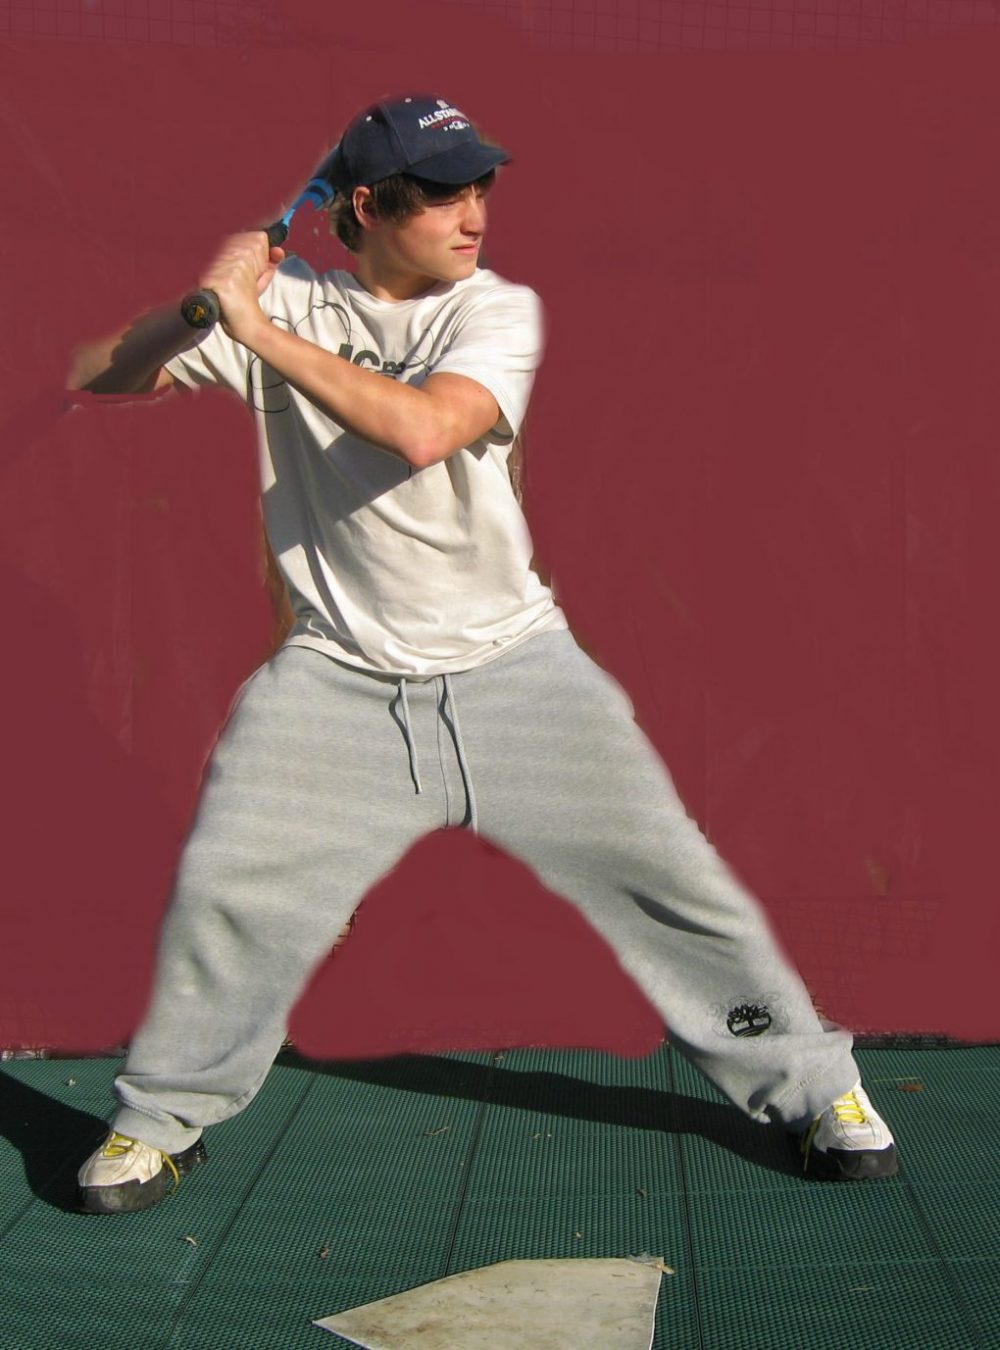 Baseball Hitting Position is an Absolute <!-- [A Chance is All Anyone can Ask For] -->